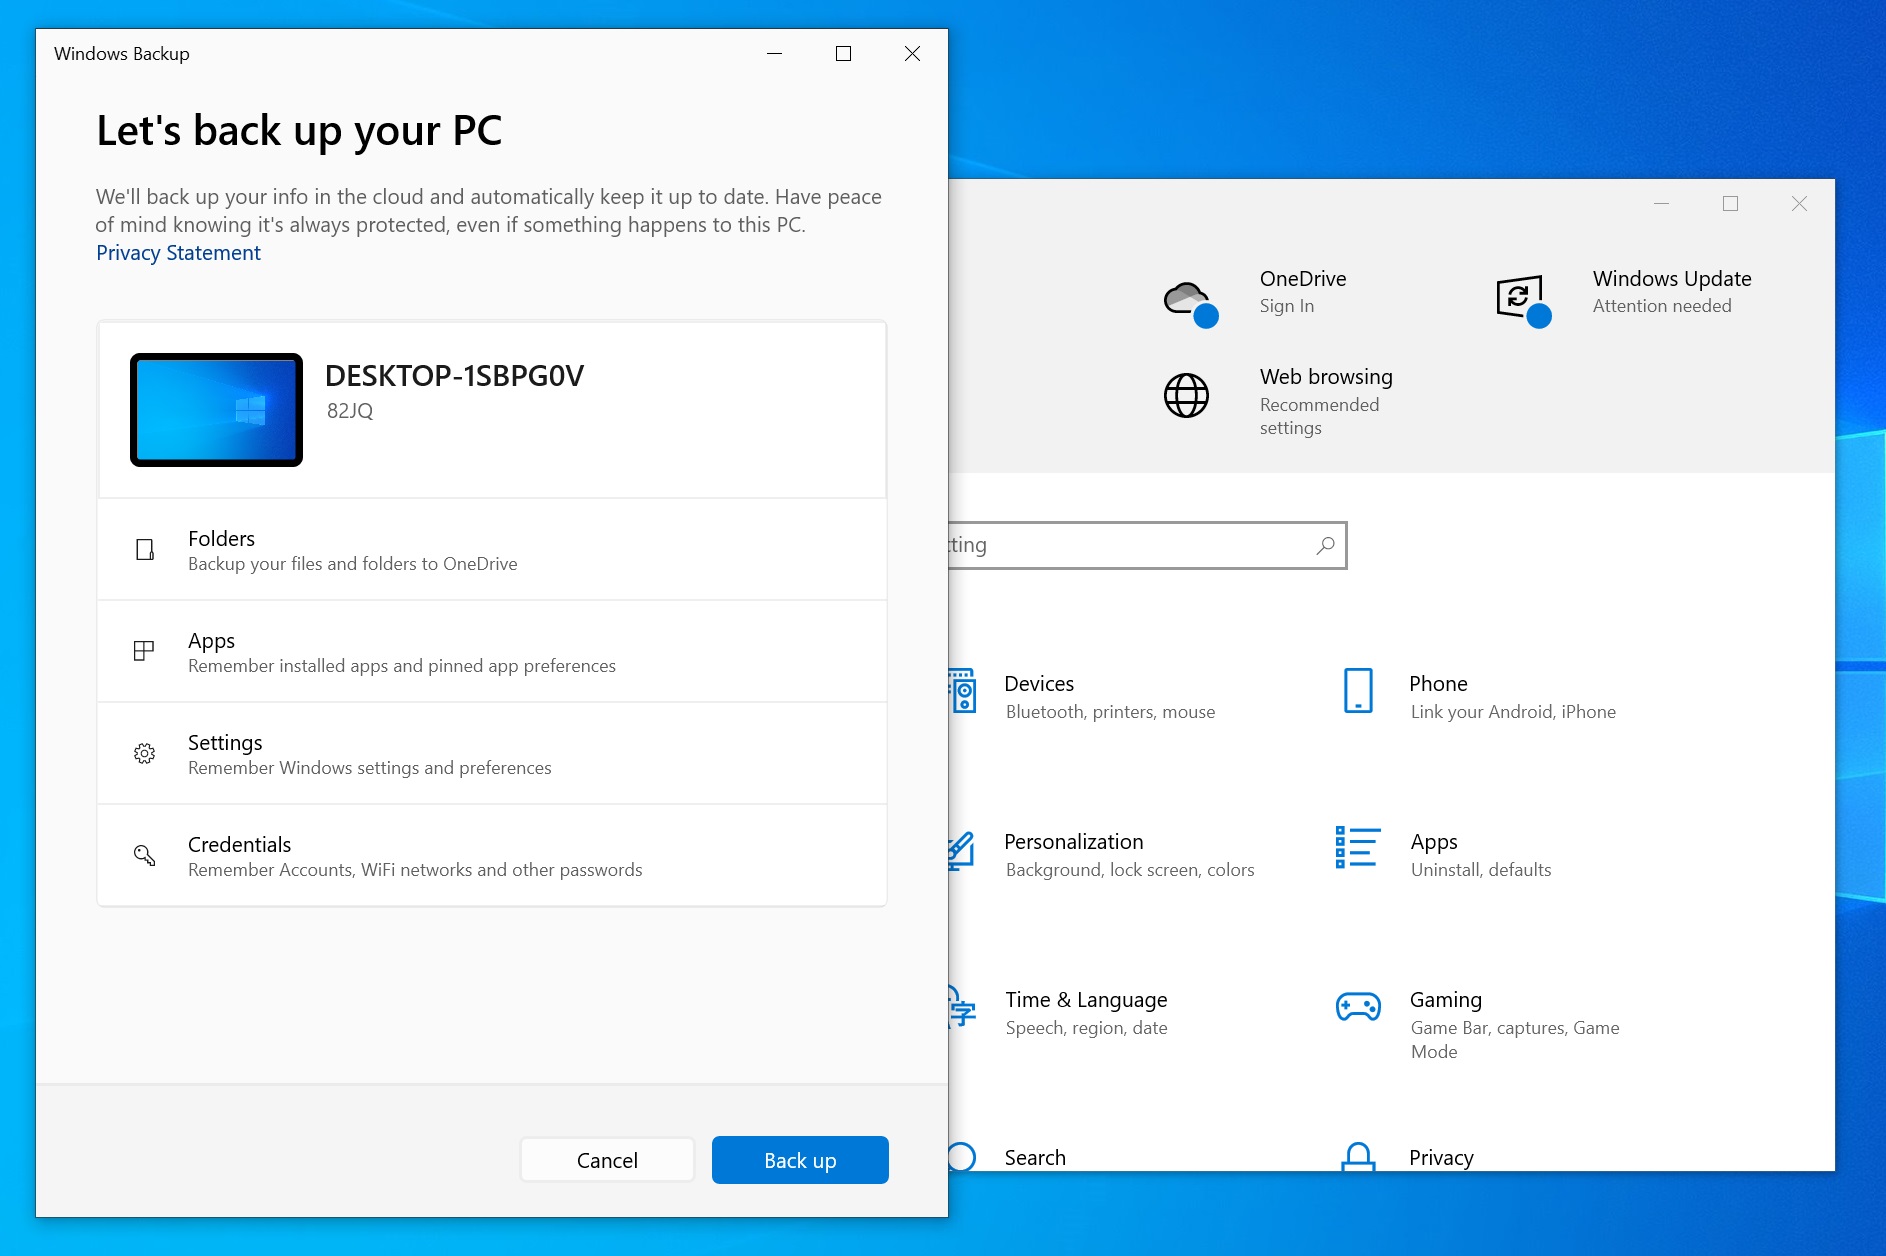 Windows 10’s new feature wants you to create a Microsoft account; ditch local accounts Windows-Backup-app.jpg